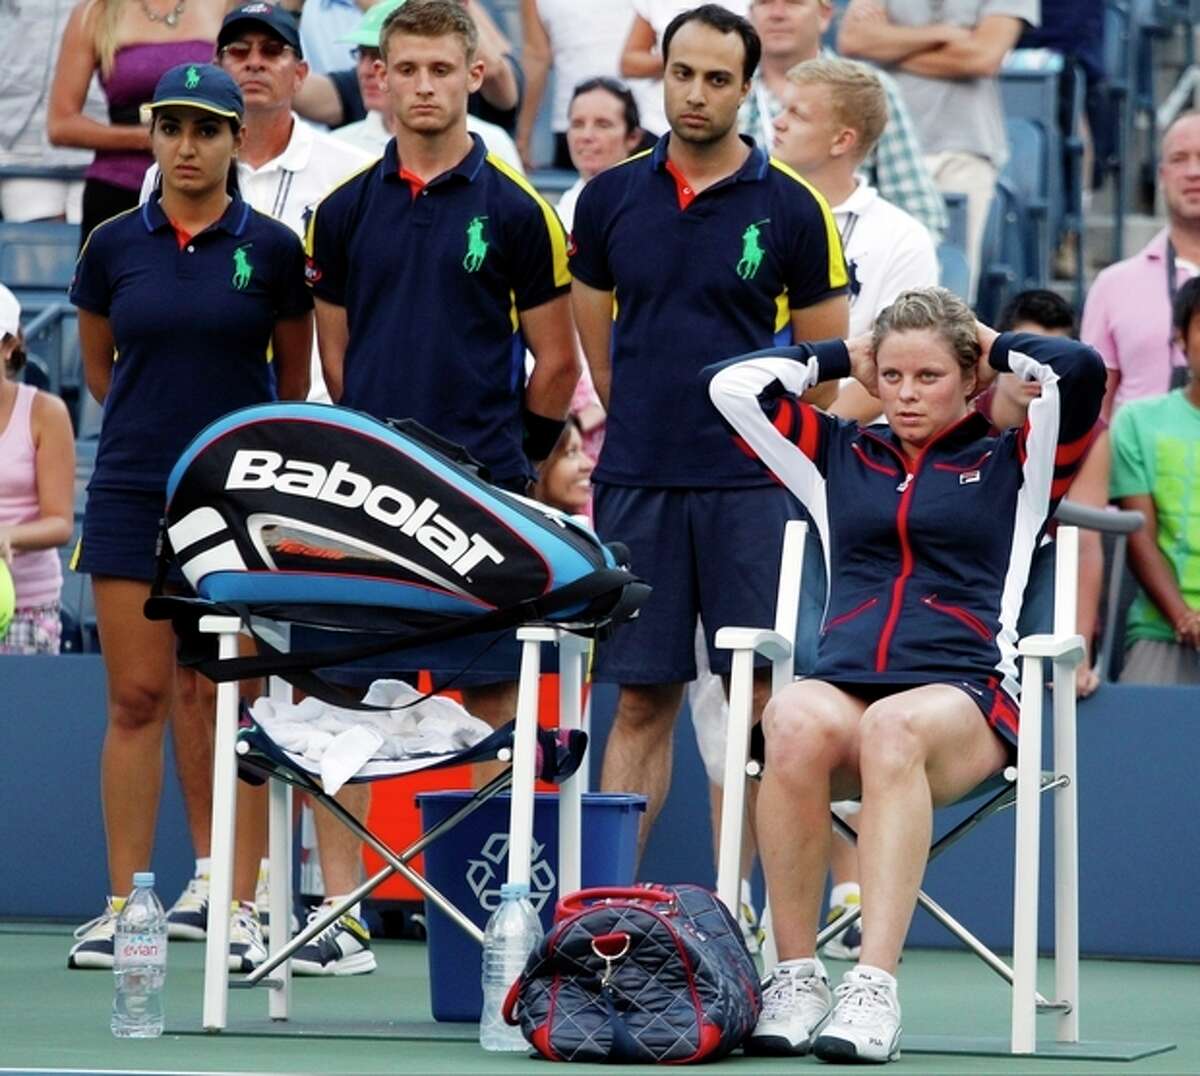 Kim Clijsters of Belgium sits on the side of the court after losing to Laura Robson of Great Britain in the second round of play at the 2012 US Open tennis tournament, Wednesday, Aug. 29, 2012, in New York. (AP Photo/Mel C. Evans)